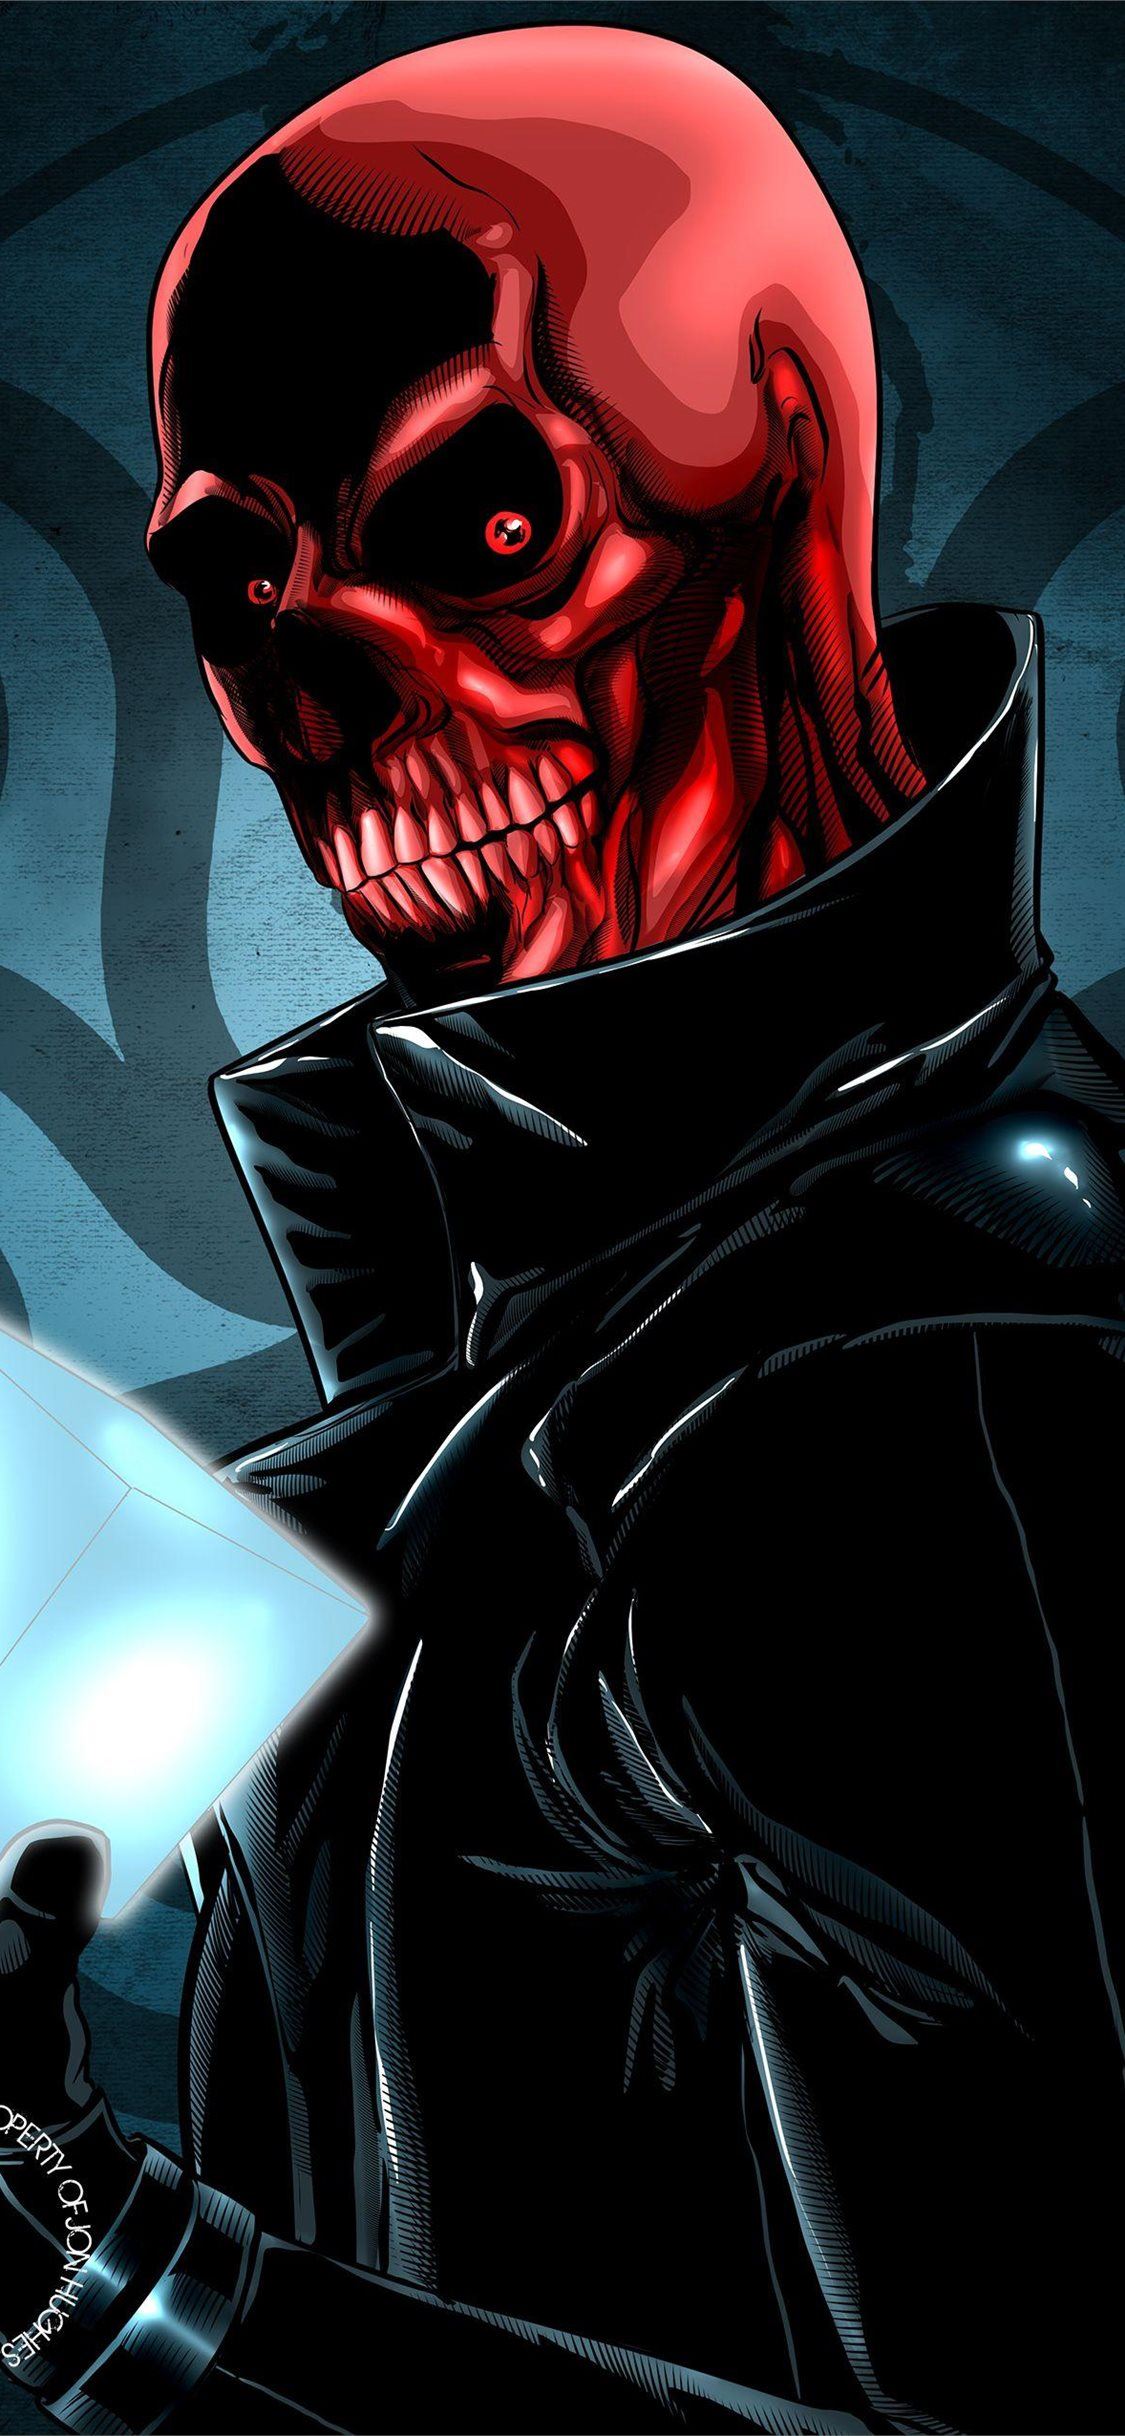 Red Skull phone wallpaper 1080P 2k 4k Full HD Wallpapers Backgrounds  Free Download  Wallpaper Crafter